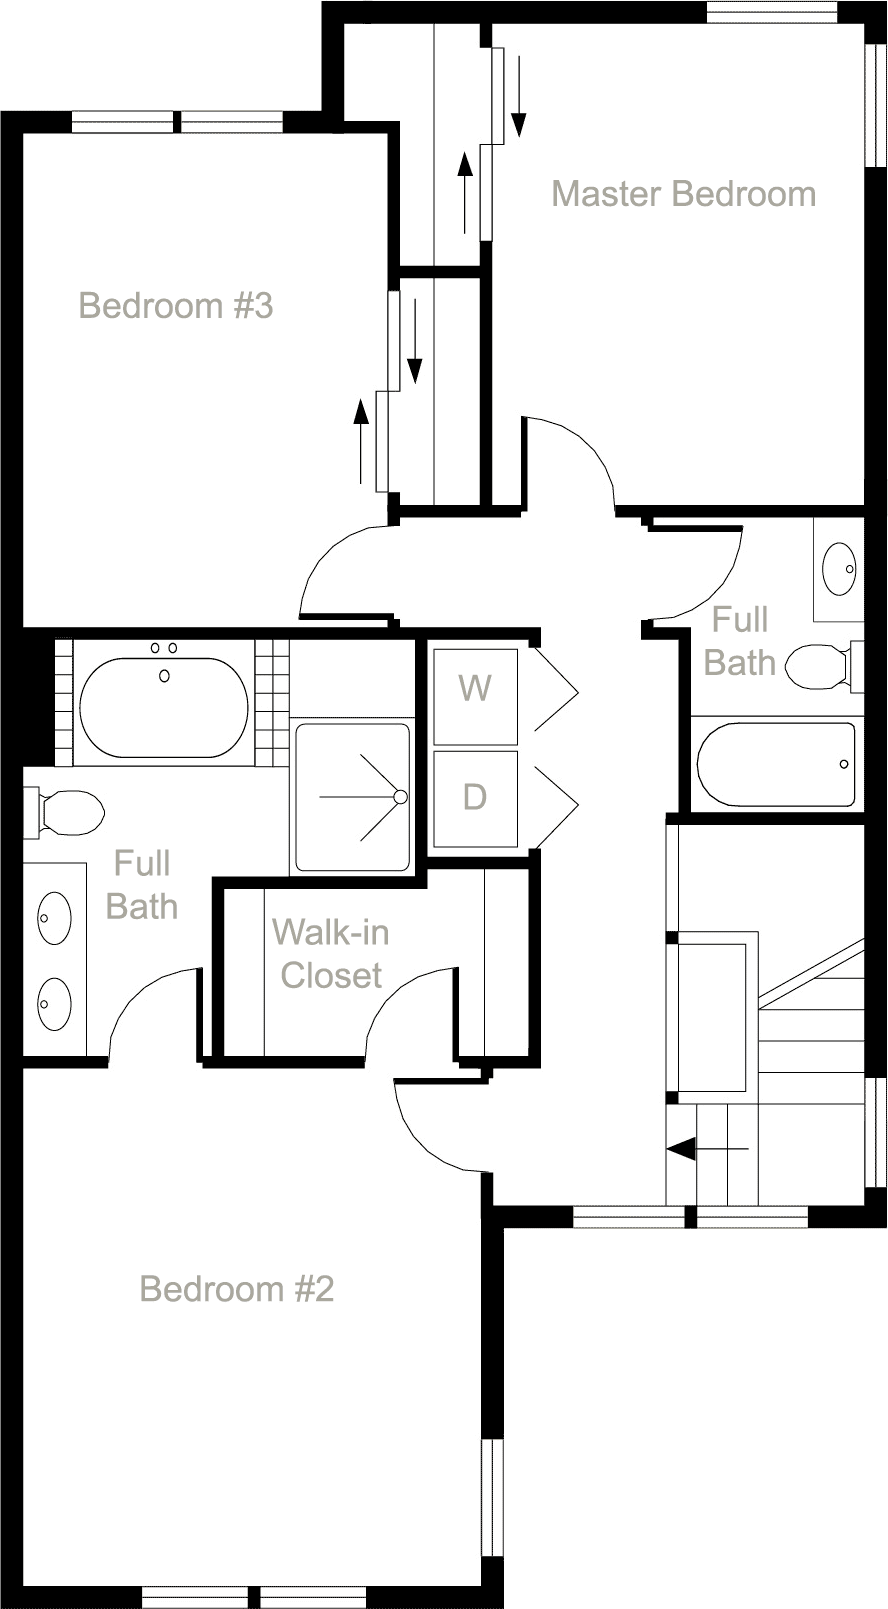 2nd Floor Plan - The Martin Gale